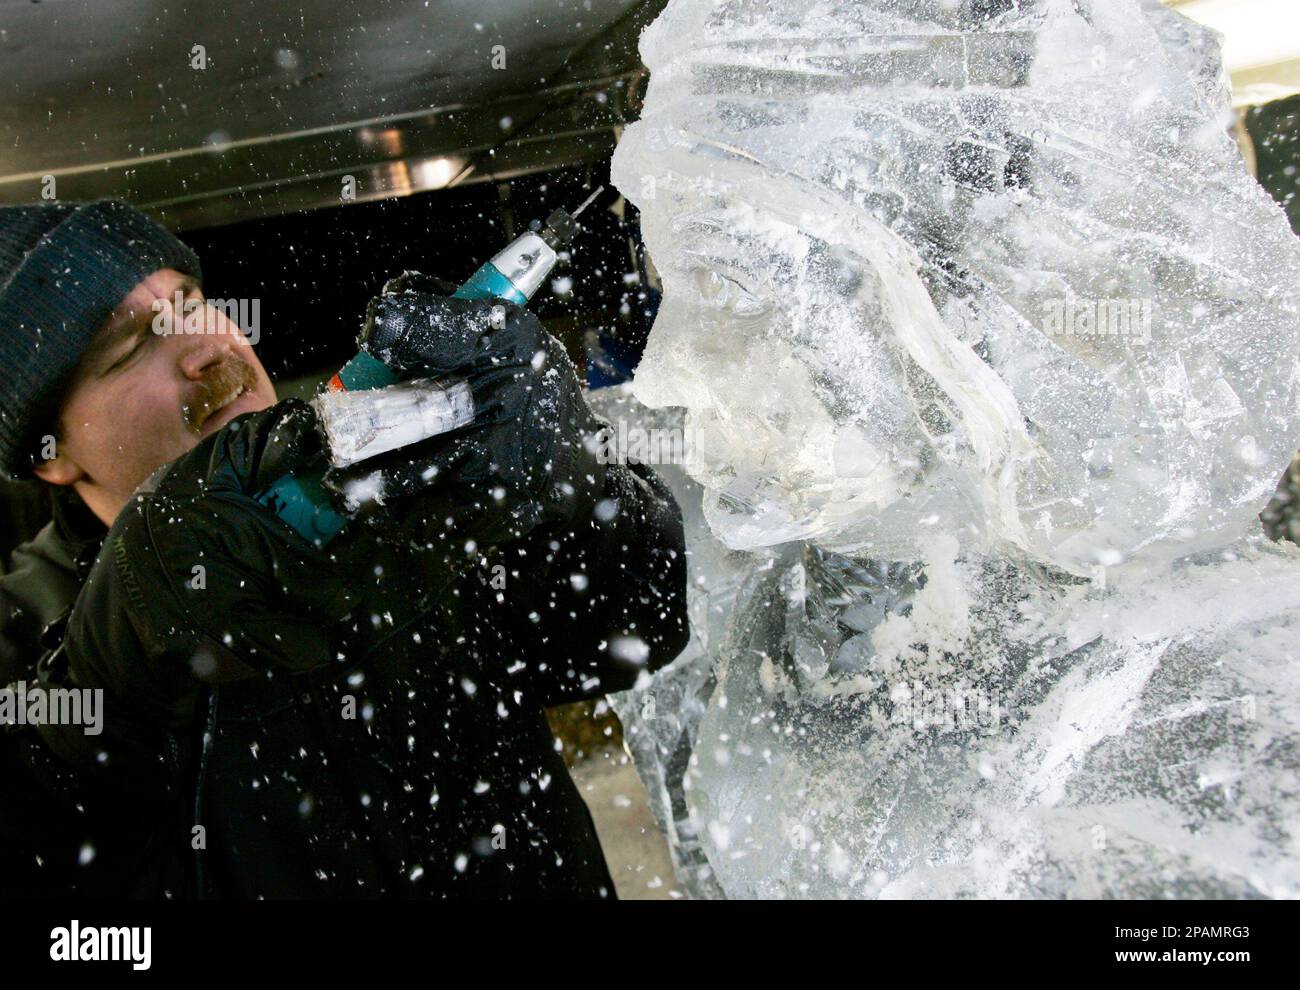 https://c8.alamy.com/comp/2PAMRG3/artist-eric-fontecchio-of-brookline-ice-company-carves-snow-white-in-brookline-mass-thursday-dec-27-2007-in-preparation-for-bostons-first-night-2008-fontecchio-will-help-carve-over-30000-pounds-of-block-ice-to-create-sculptures-entitled-snow-white-and-the-7-dwarfs-and-a-message-of-peace-to-be-displayed-in-downtown-boston-ap-photoelise-amendola-2PAMRG3.jpg